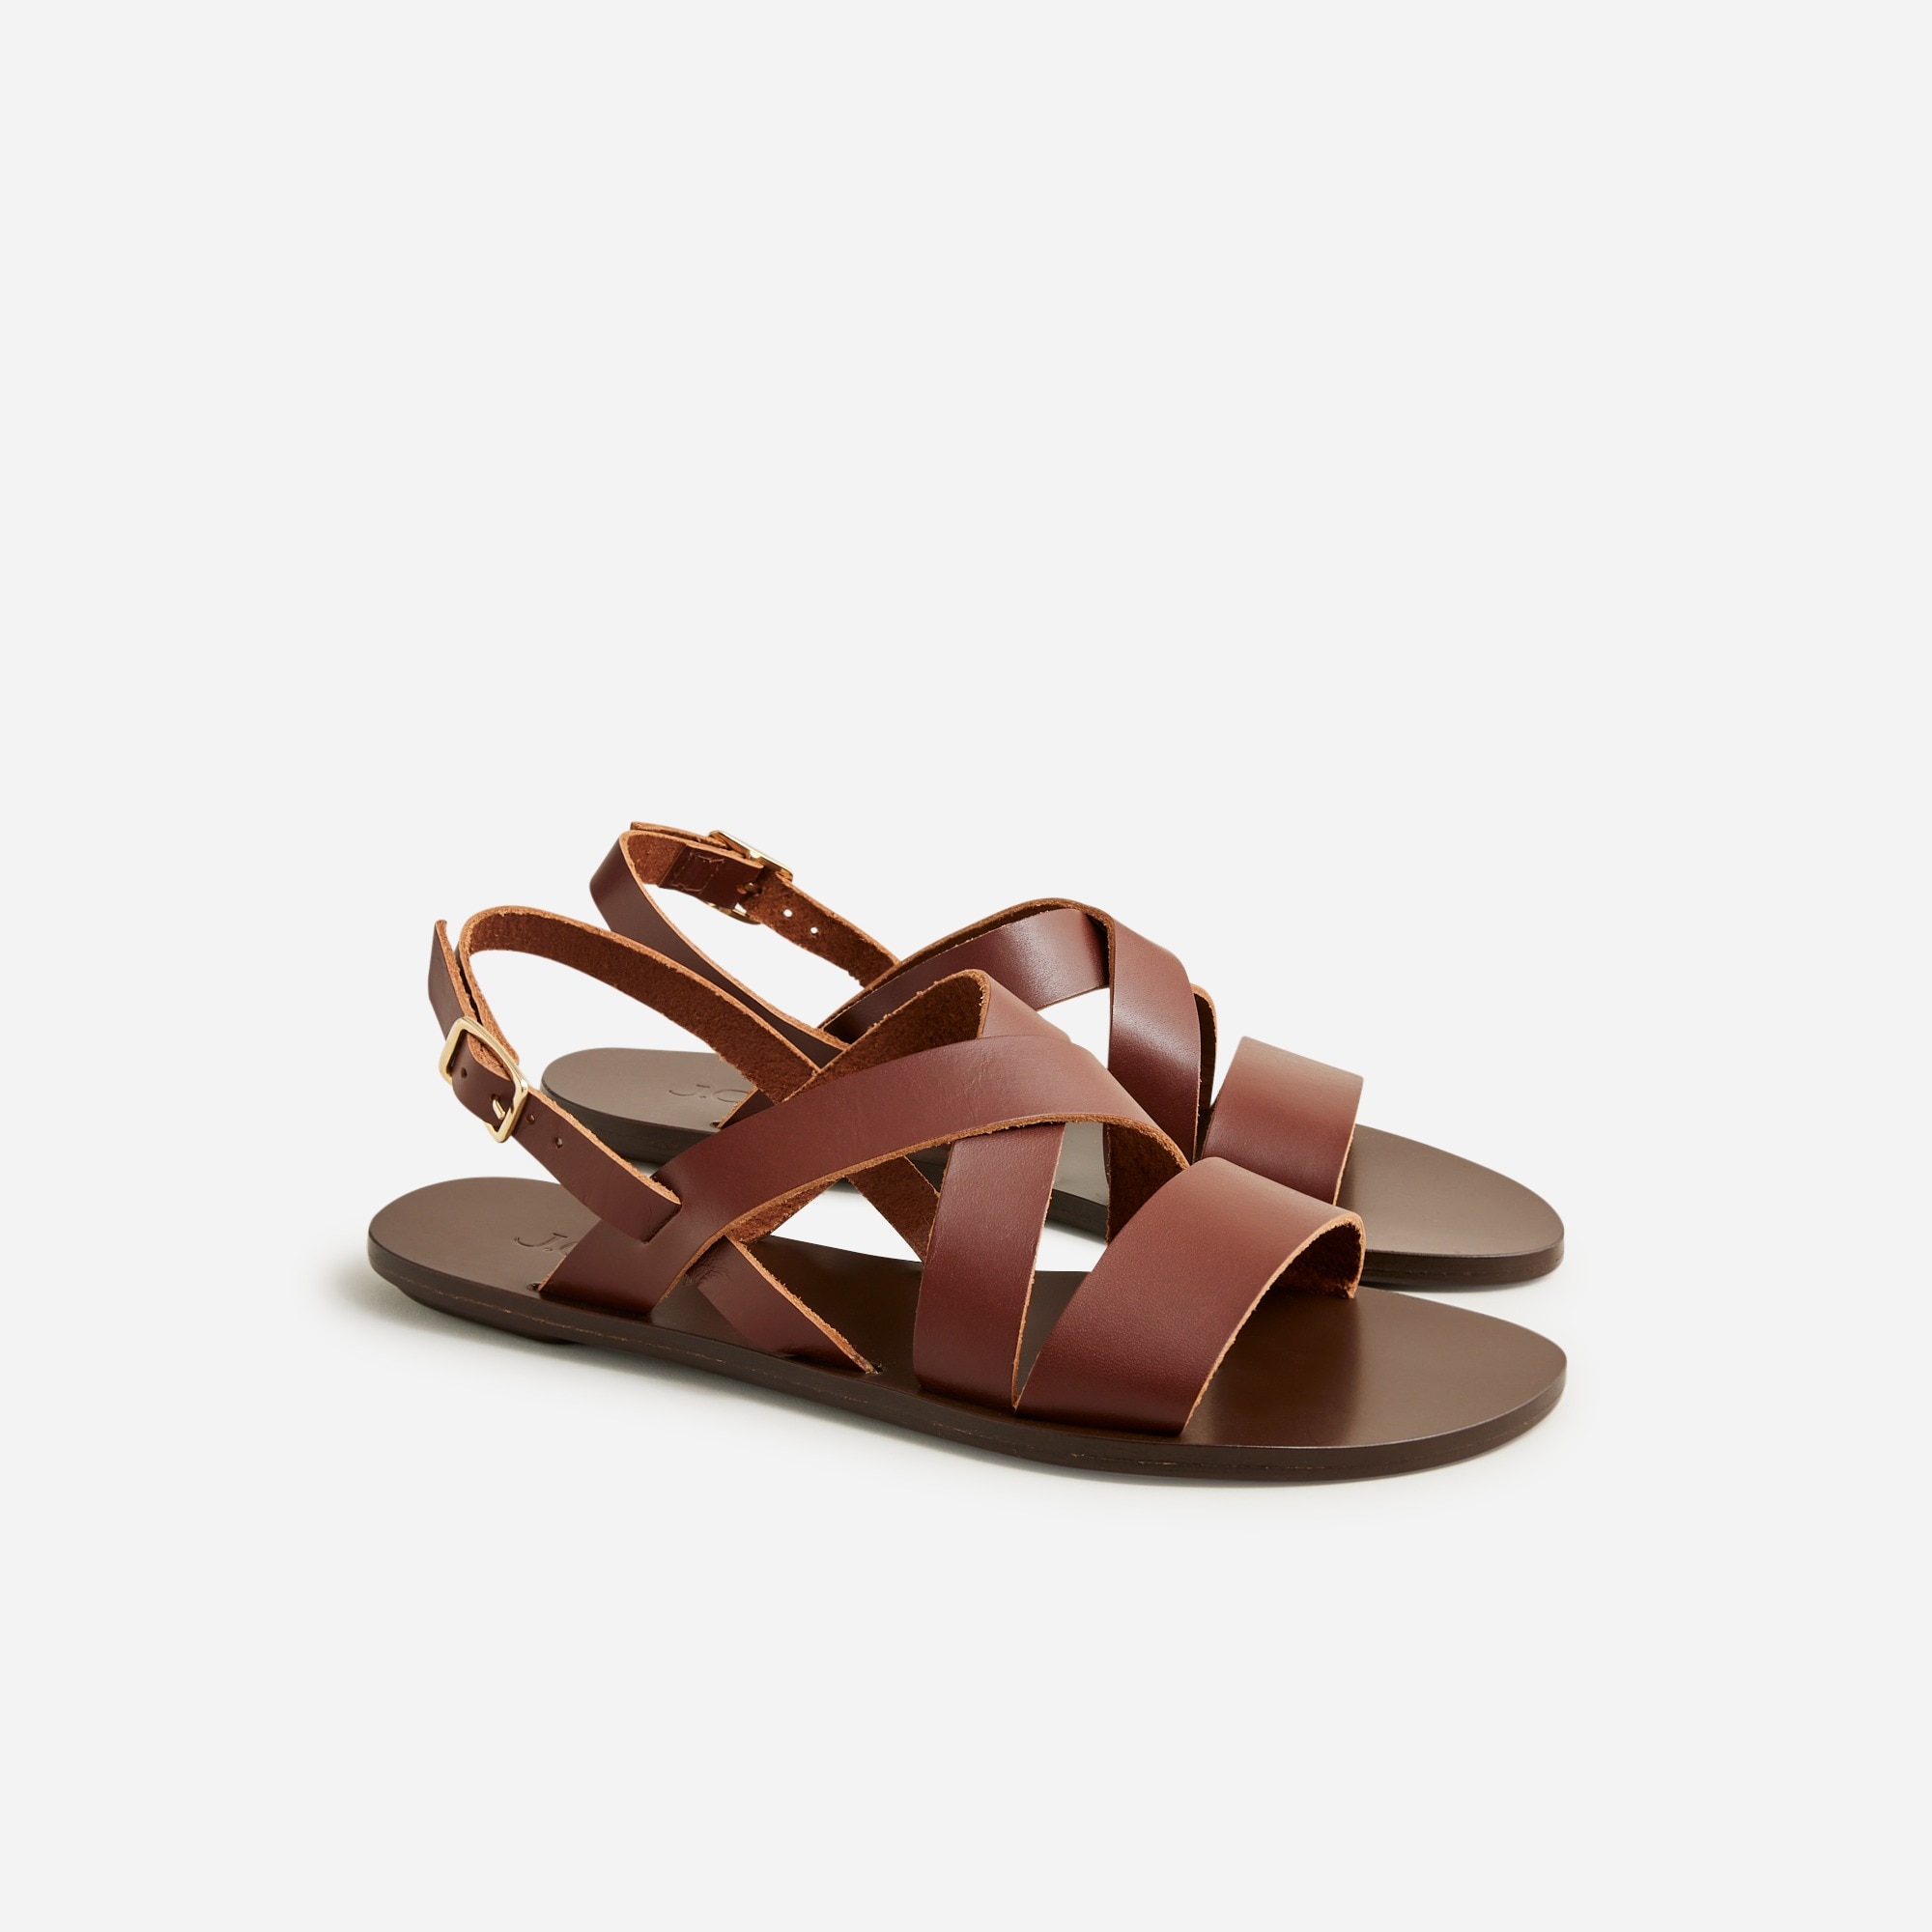  Made-in-Italy slingback sandals in leather